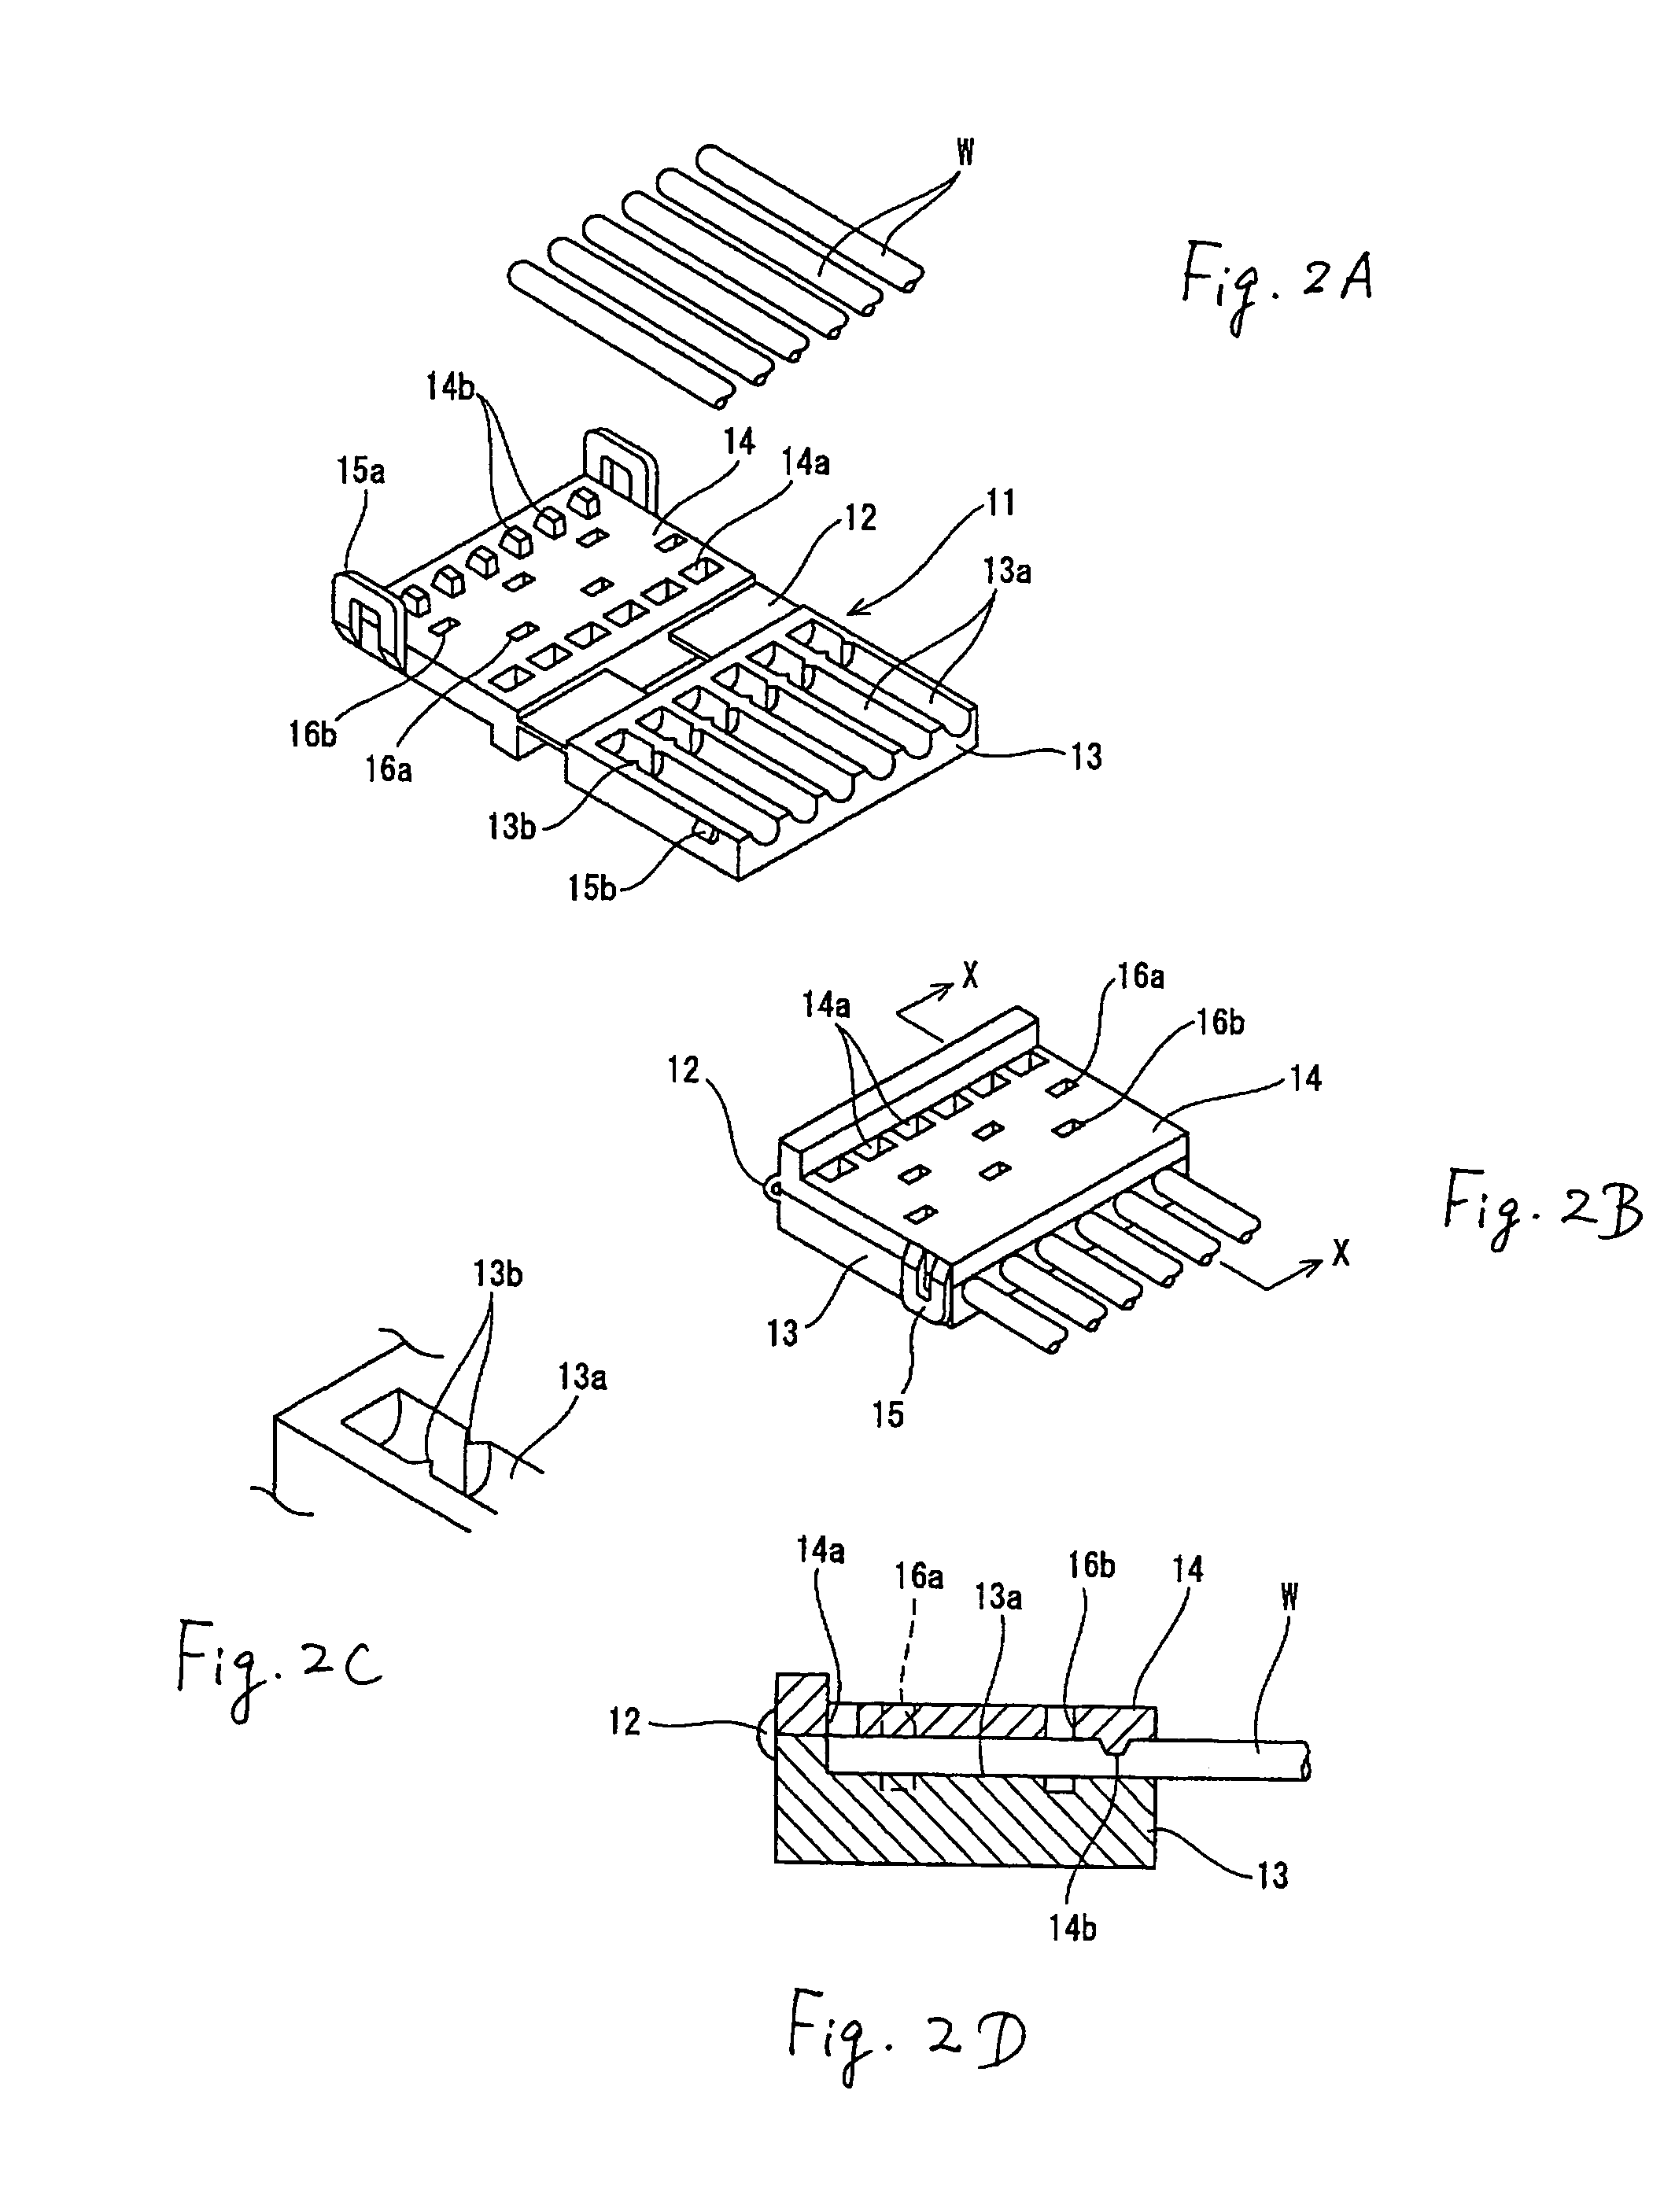 Splice absorbing structure for motor vehicle